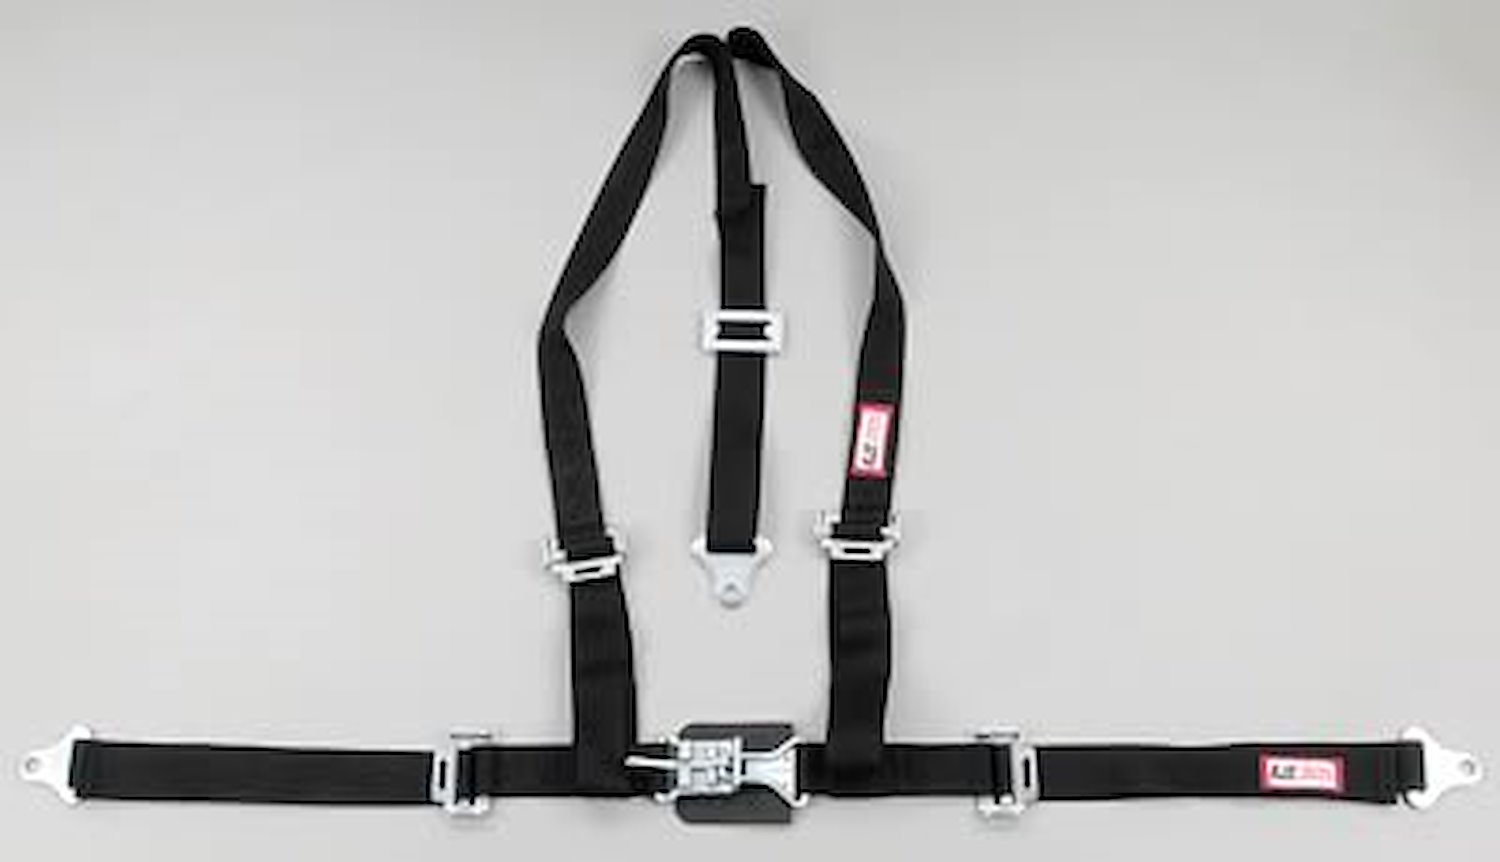 NON-SFI L&L HARNESS 3 PULL UP Lap Belt SNAP SEWN IN 2 S.H. Individual ROLL BAR Mount WRAP/BOLT BLACK